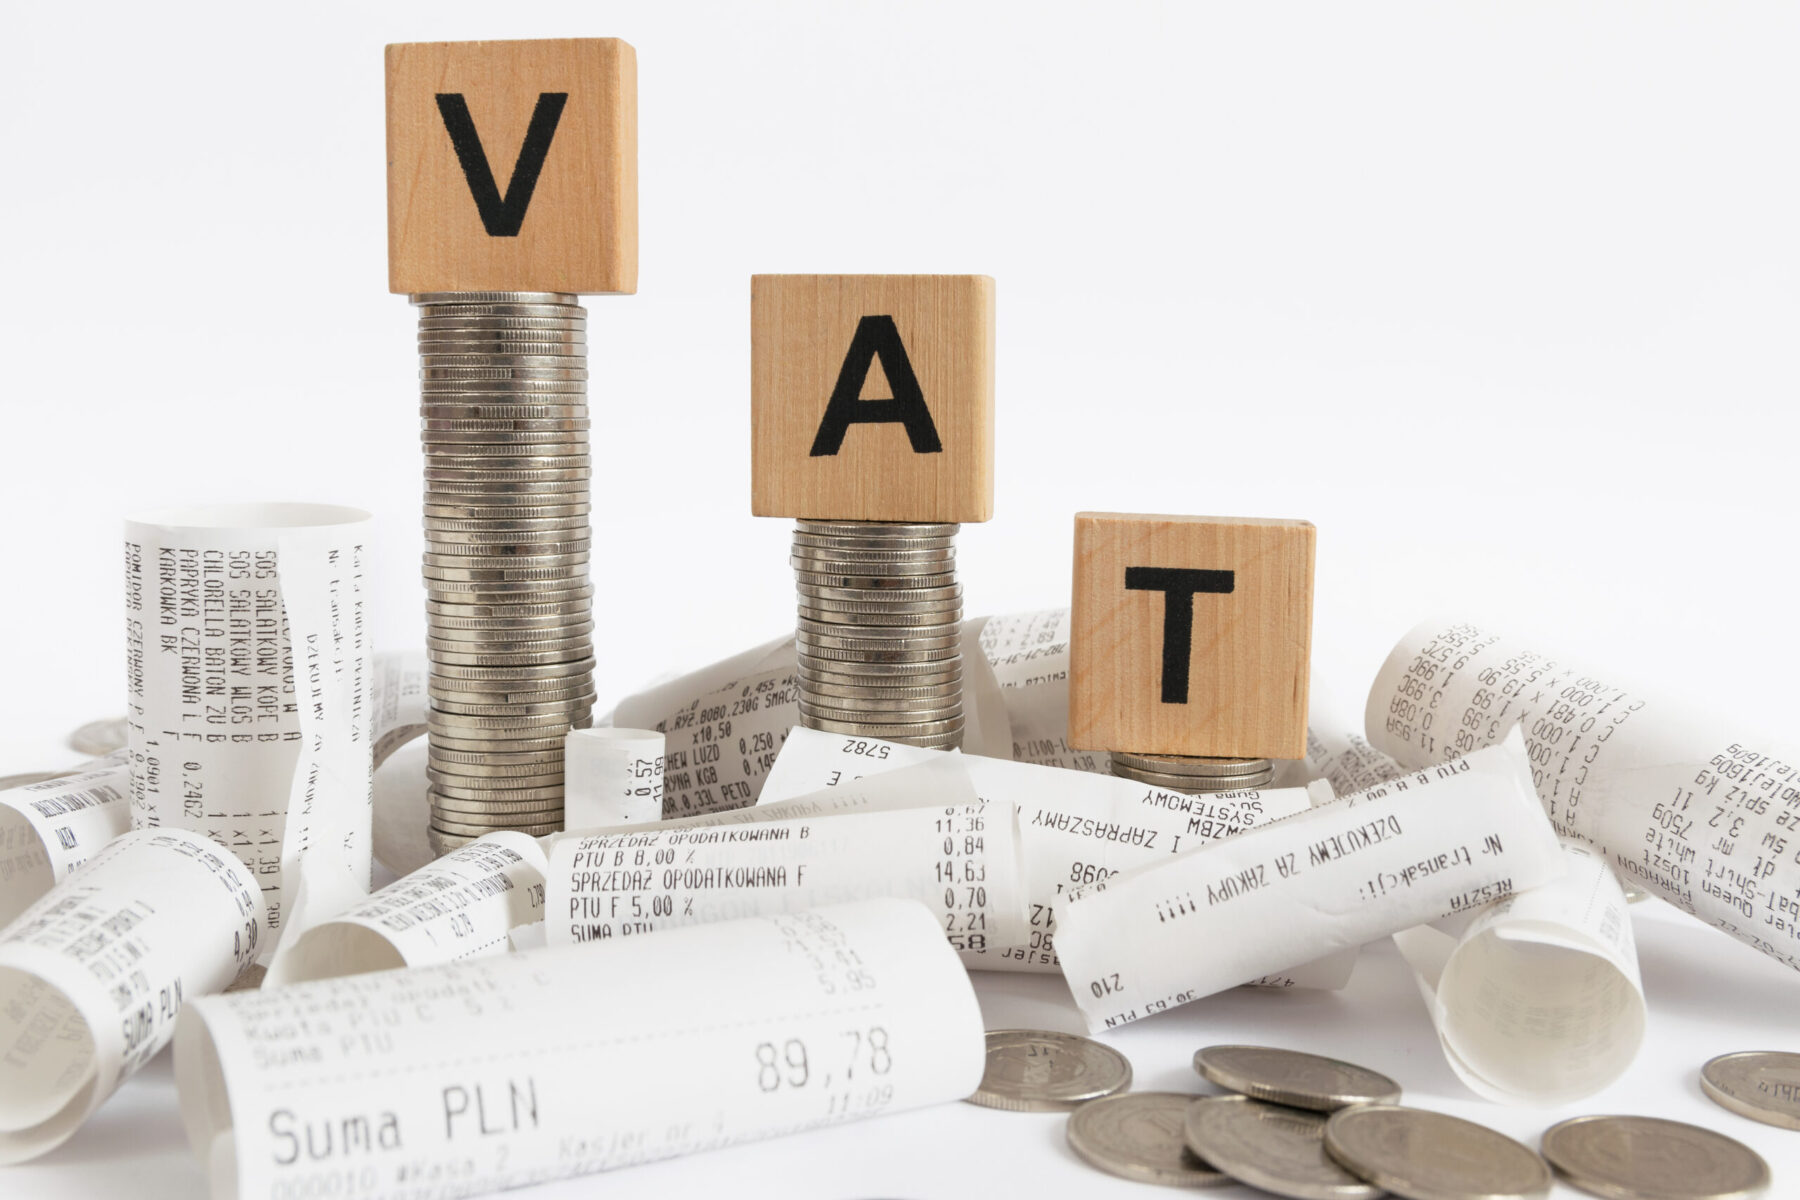 vat-rates-2021-22-which-goods-and-services-are-exempt-from-vat